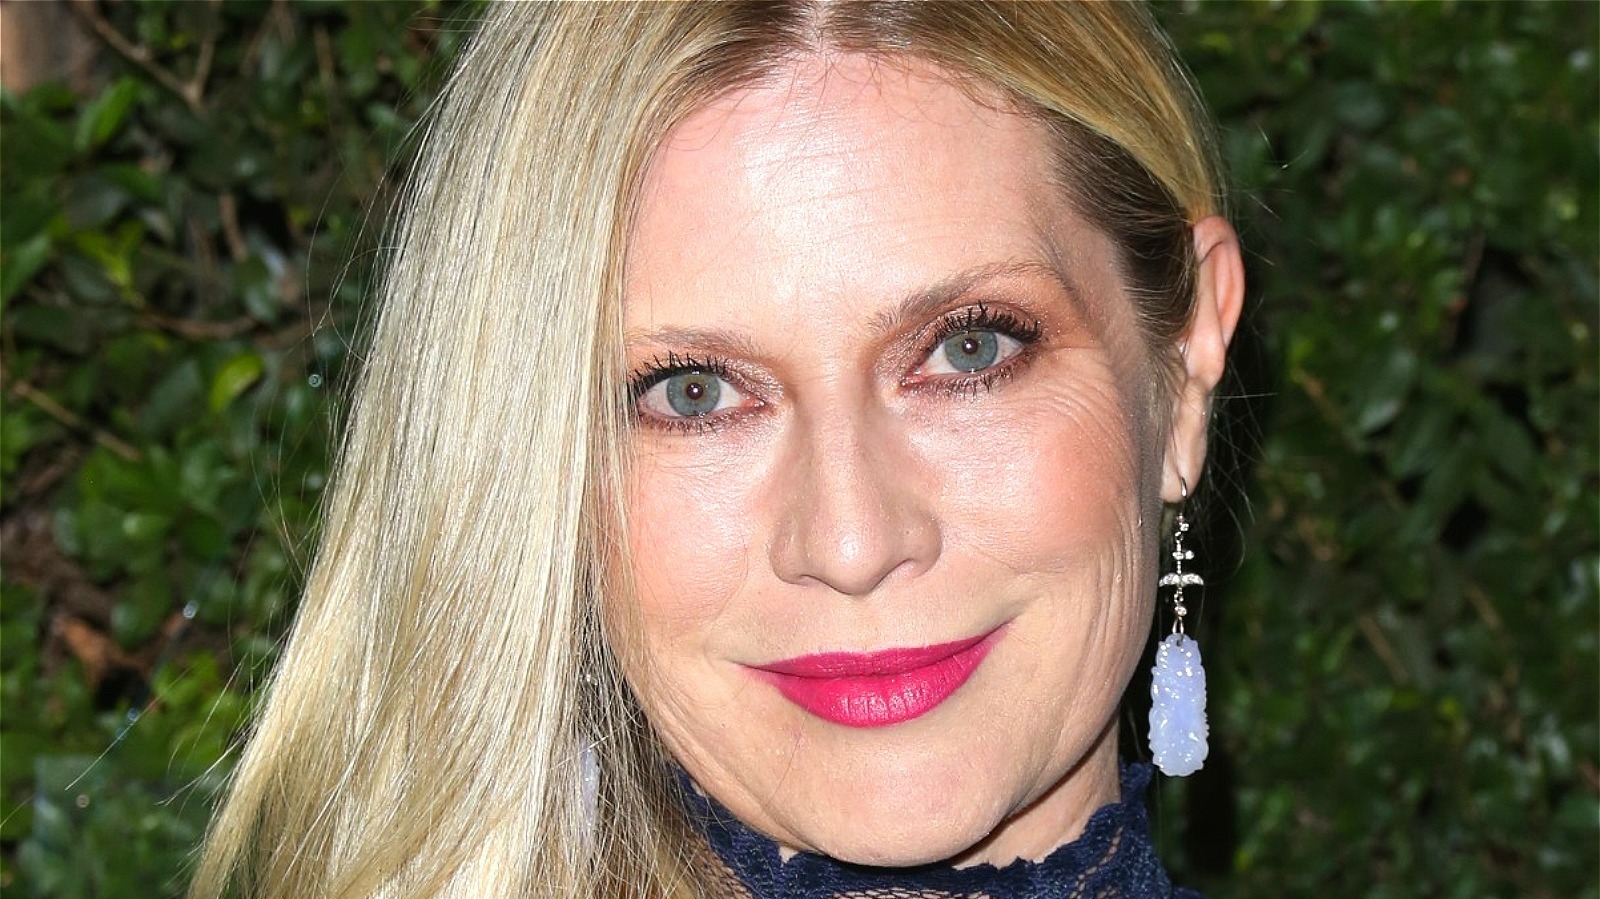 The Staggering Number Of Csi Miami Episodes Emily Procter Actually Filmed